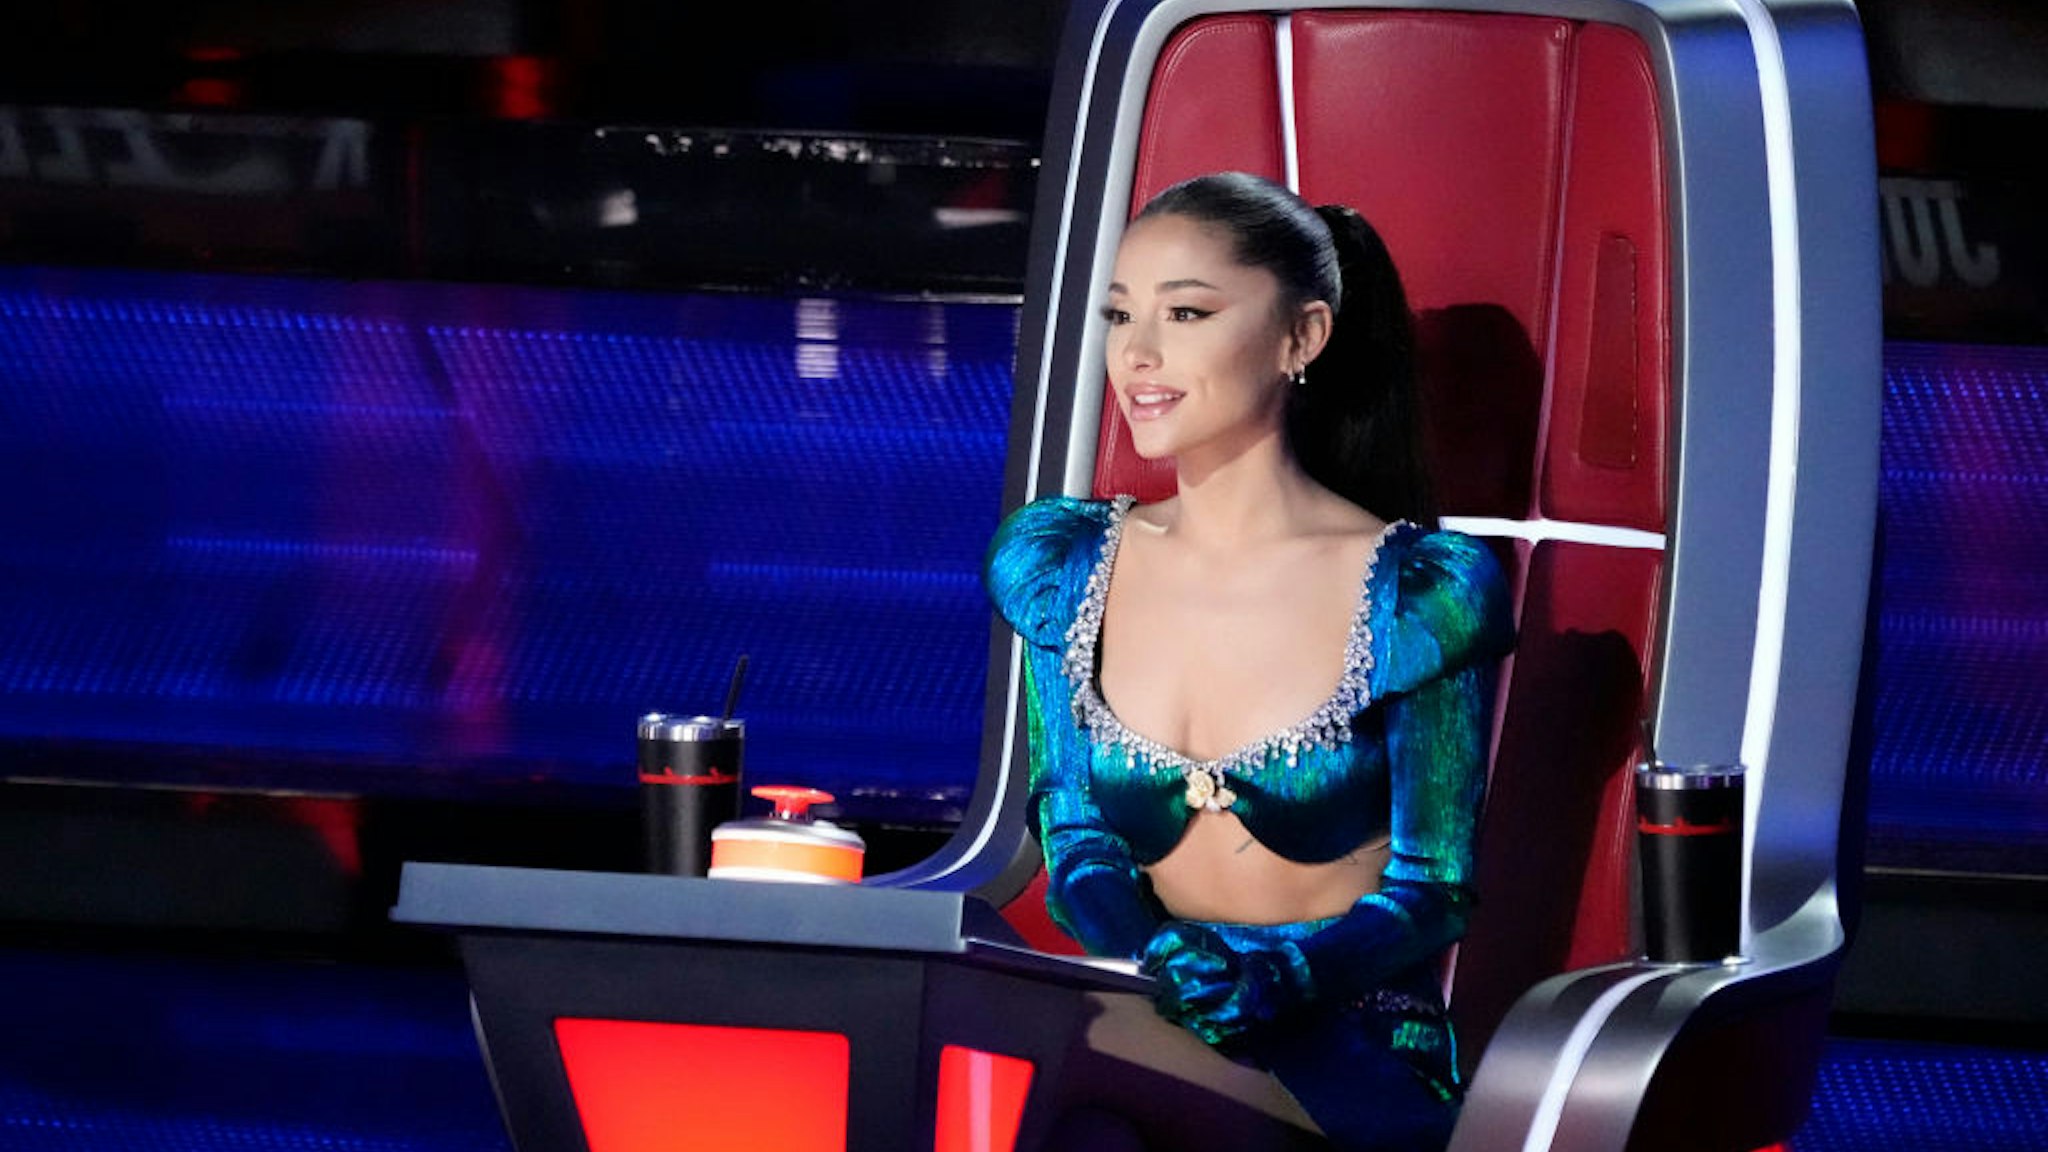 THE VOICE -- "Knockout Rounds" Episode 2113 -- Pictured: Ariana Grande --